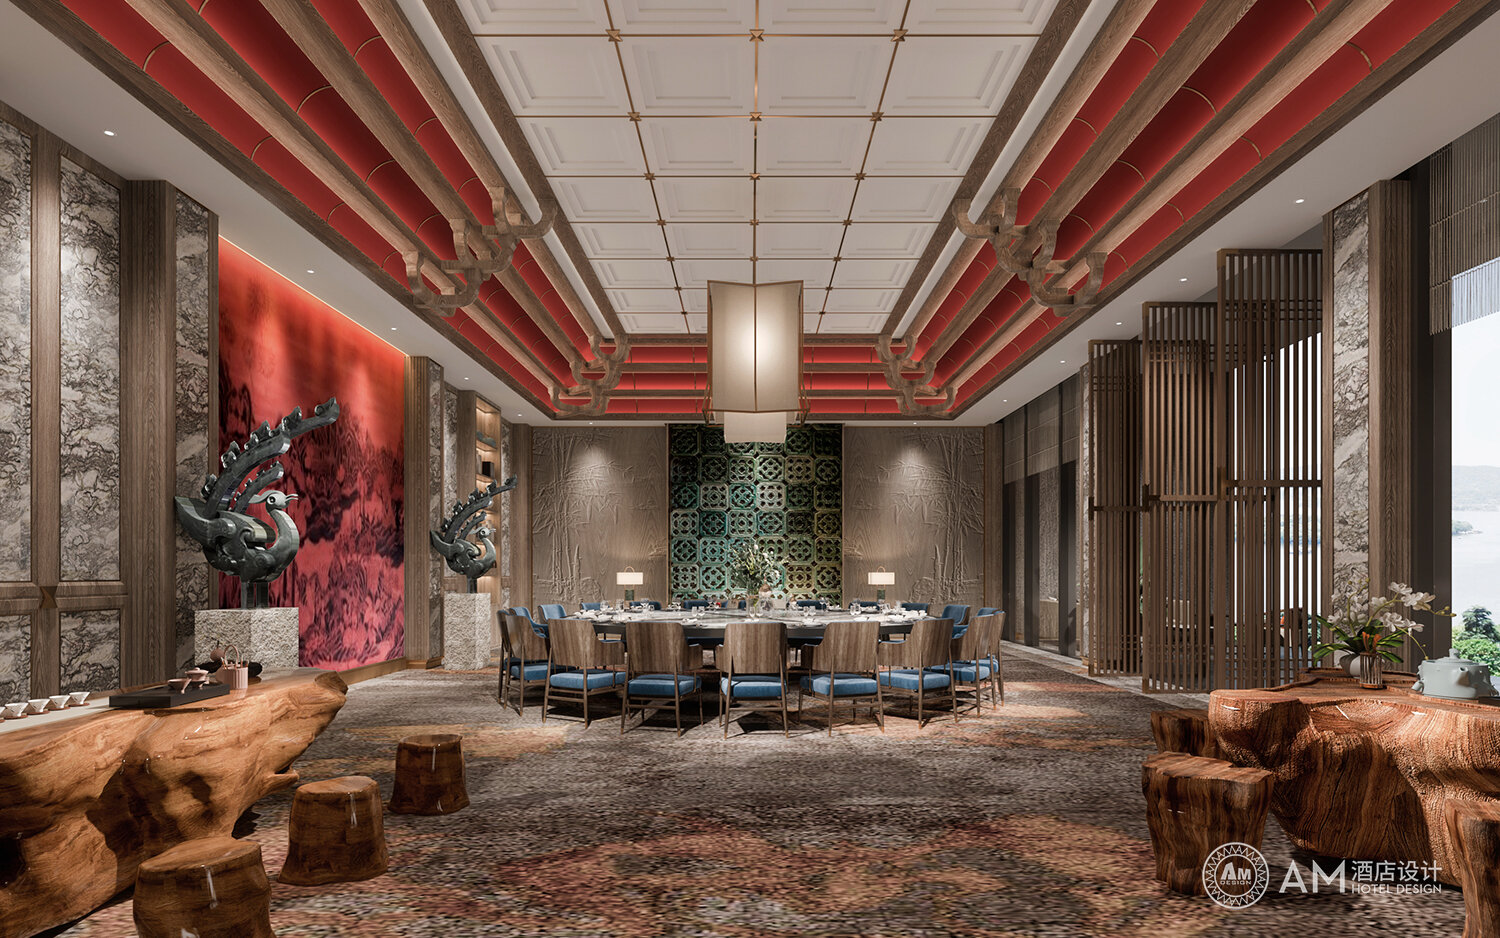 AM DESIGN | Luxury private room design of South Lake Holiday Hotel in Hanzhong, Shaanxi